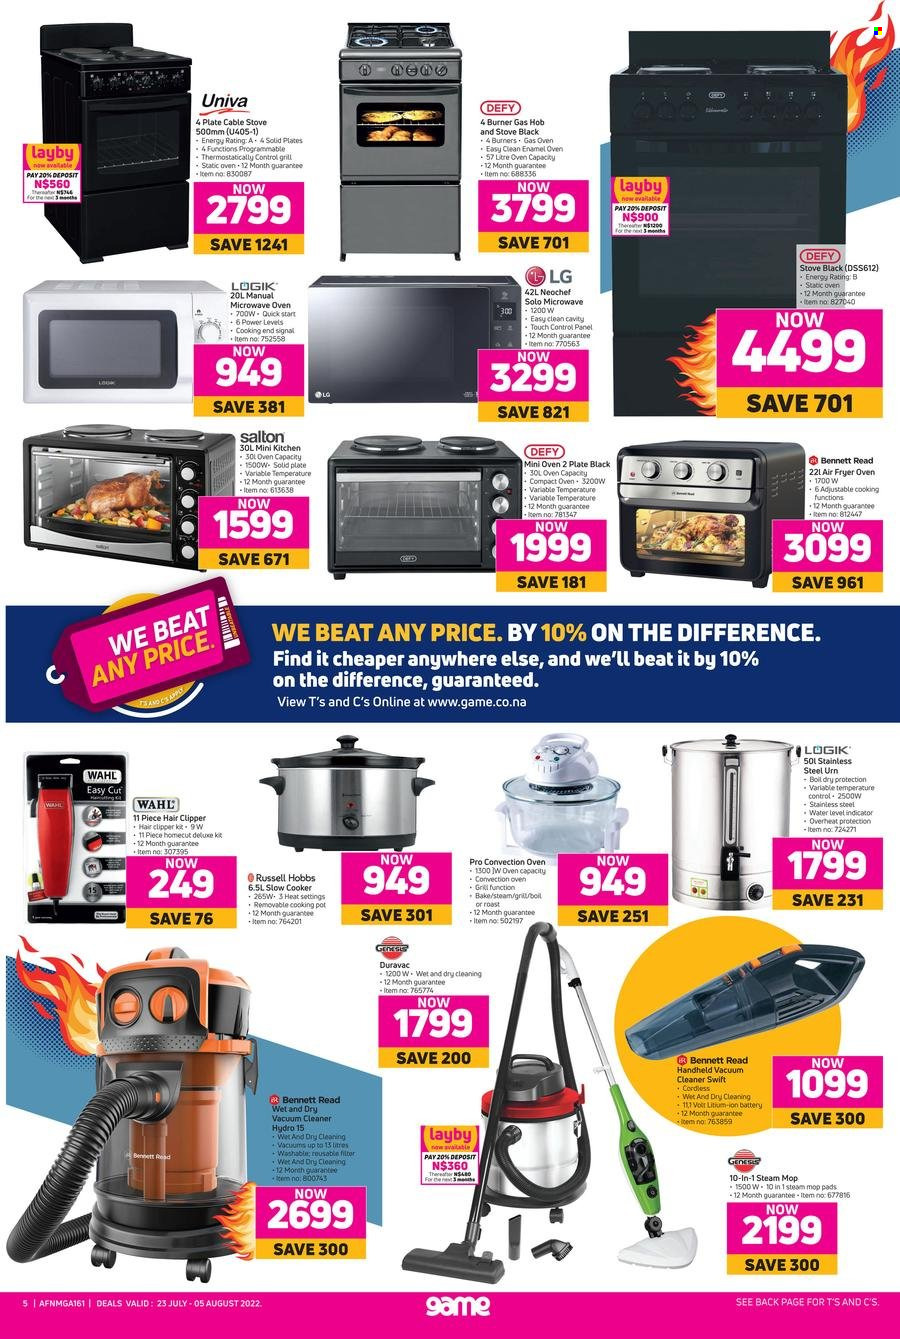 Game catalogue  - 23/07/2022 - 05/08/2022 - Sales products - Signal, pot, plate, LG, oven, convection oven, compact oven, air fryer oven, microwave oven, hob, vacuum cleaner, Bennett Read, cordless handheld cleaner, slow cooker, Russell Hobbs, mini-kitchen. Page 5.